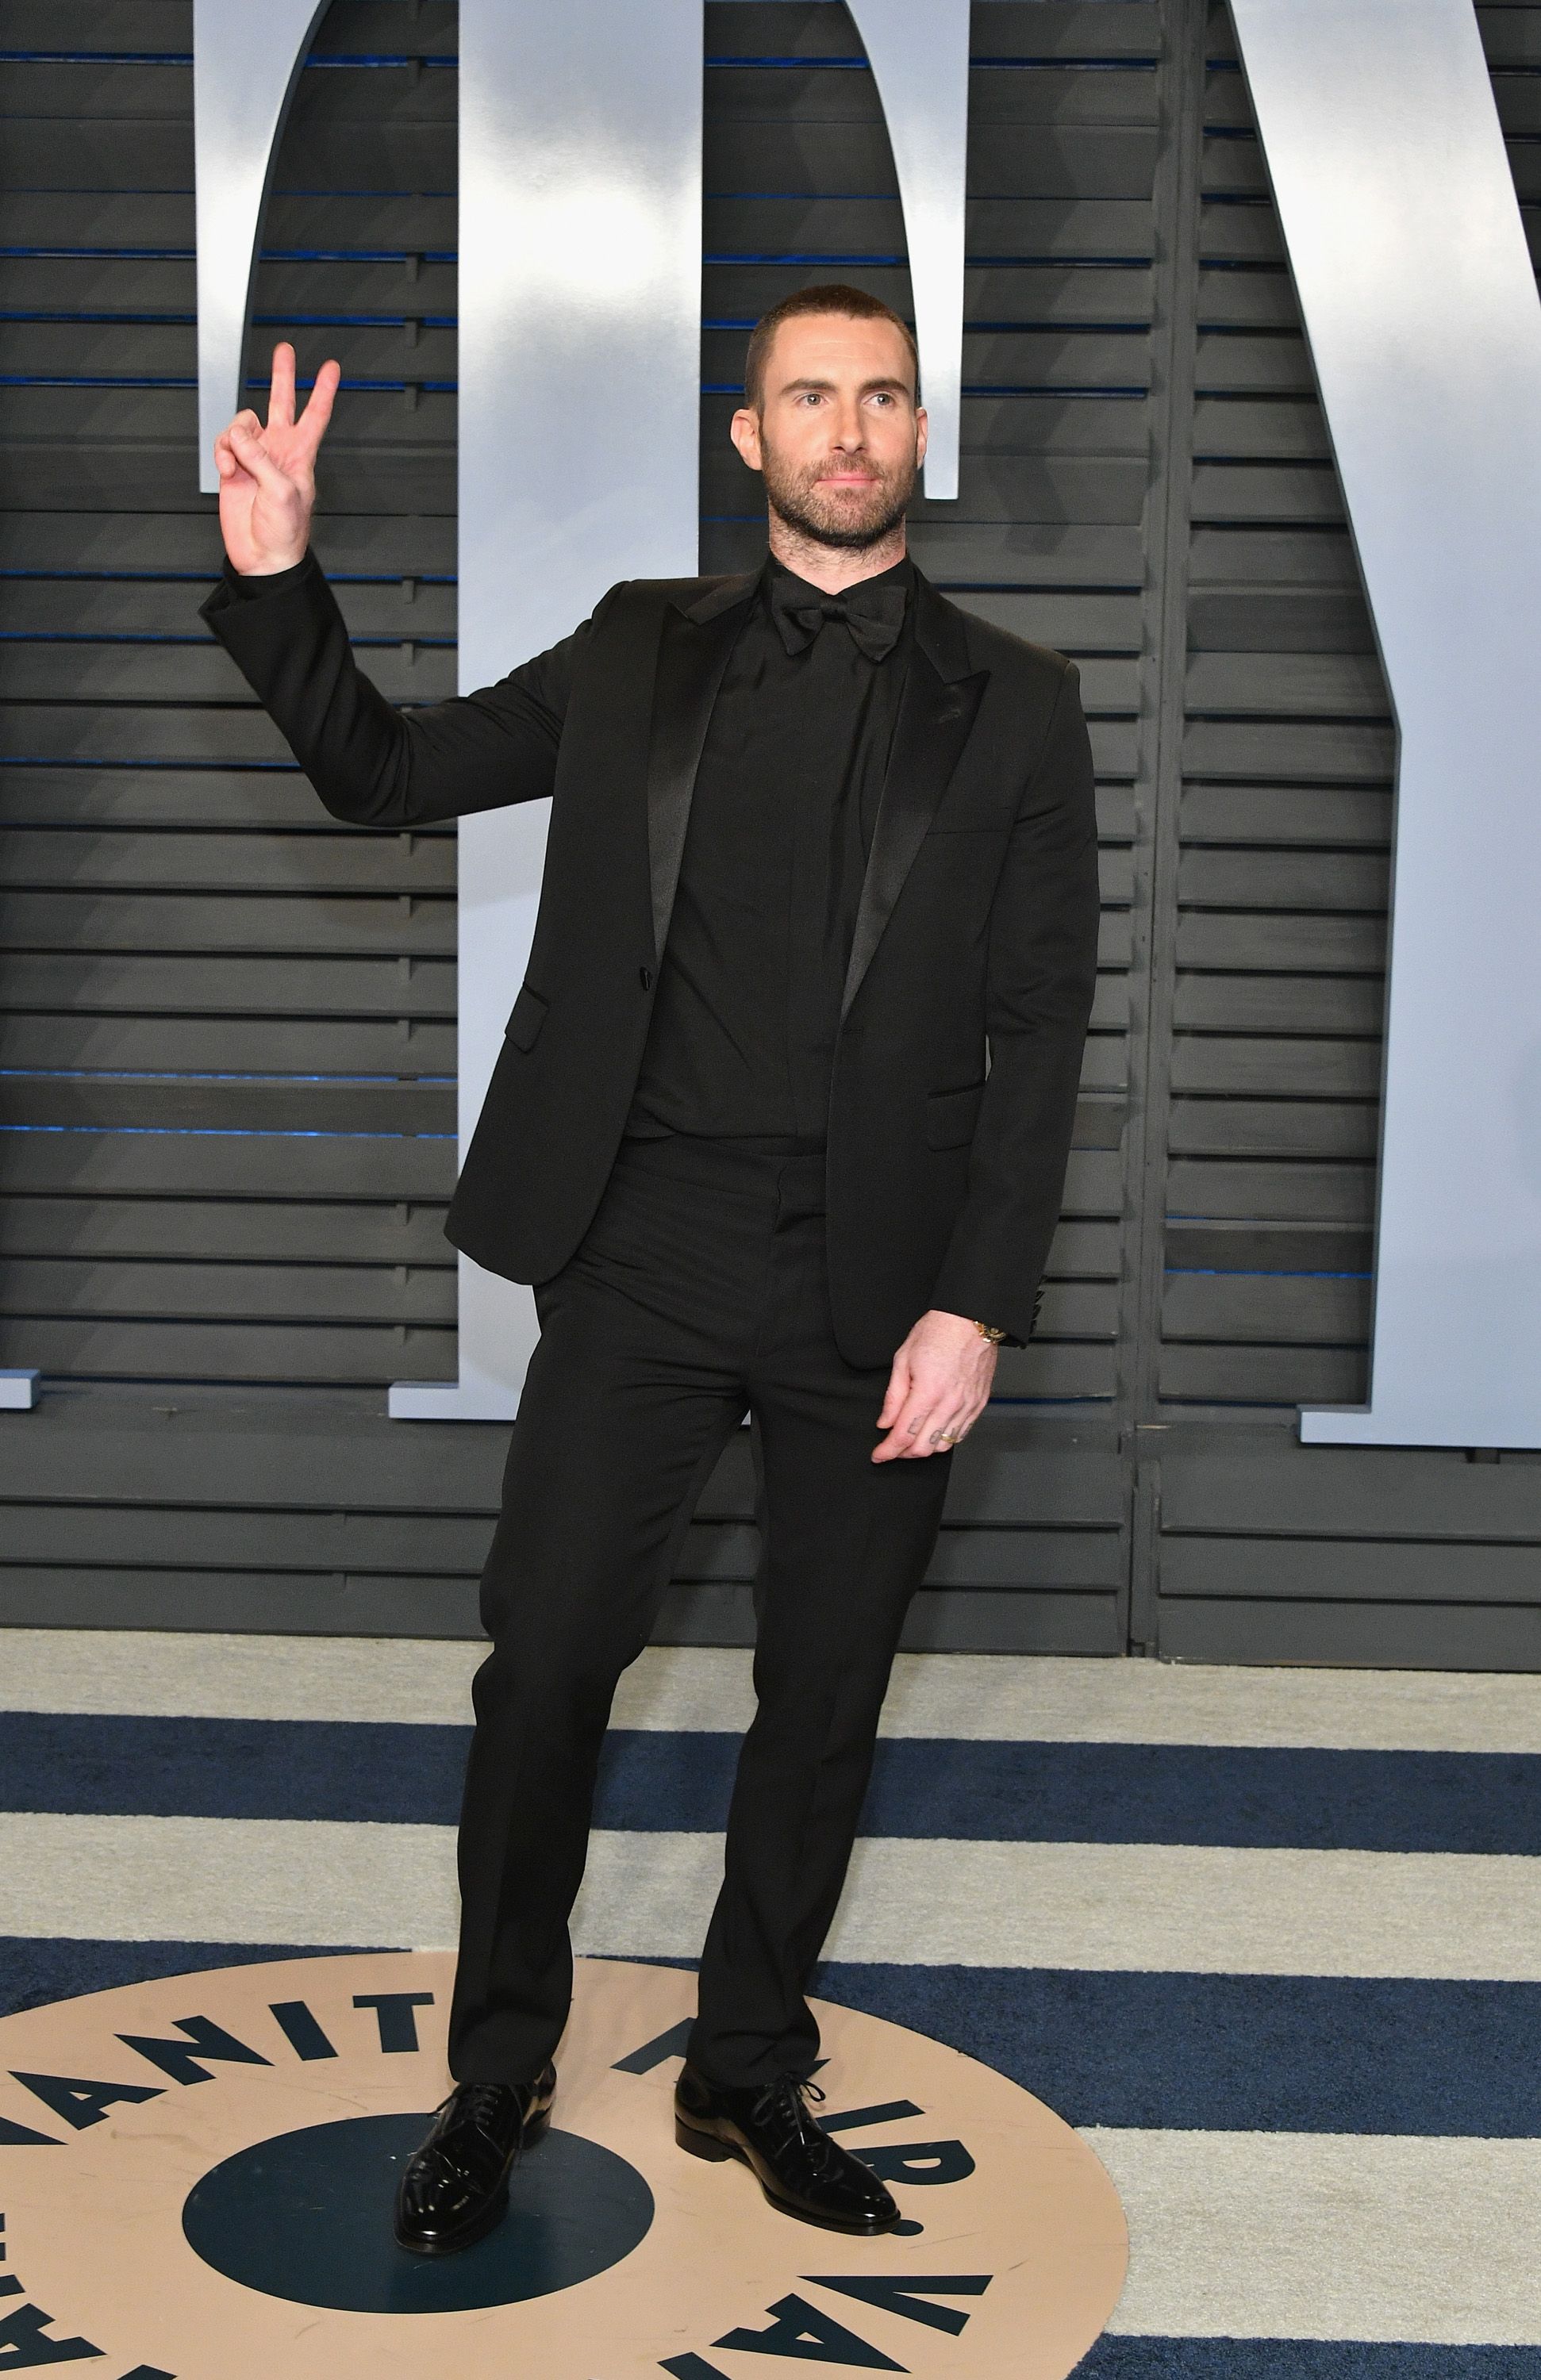 Adam Levine attends the 2018 Vanity Fair Oscar Party hosted by Radhika Jones at Wallis Annenberg Center for the Performing Arts on March 4, 2018 in Beverly Hills, California.